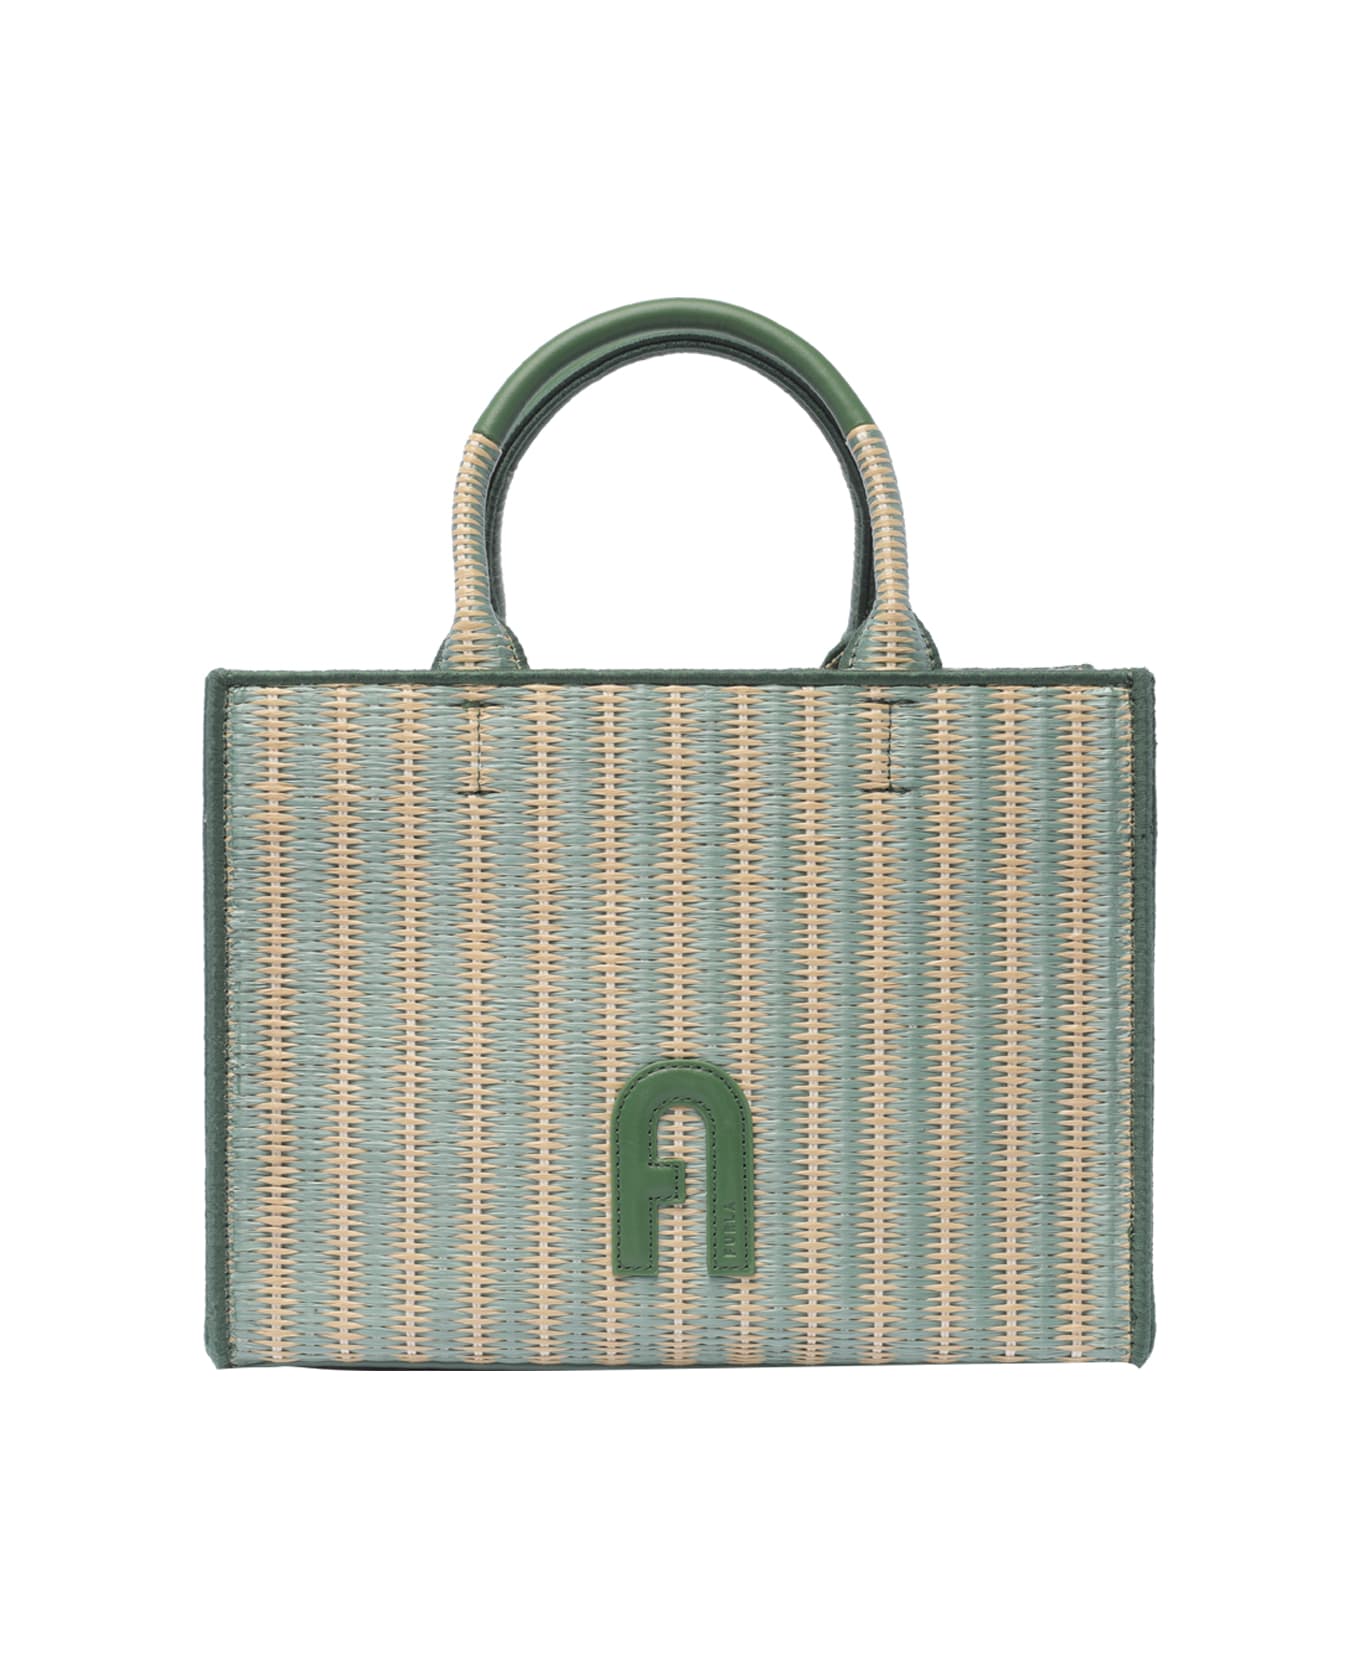 Furla Opportunity Tote Bag - TONI MINERAL GREEN トートバッグ